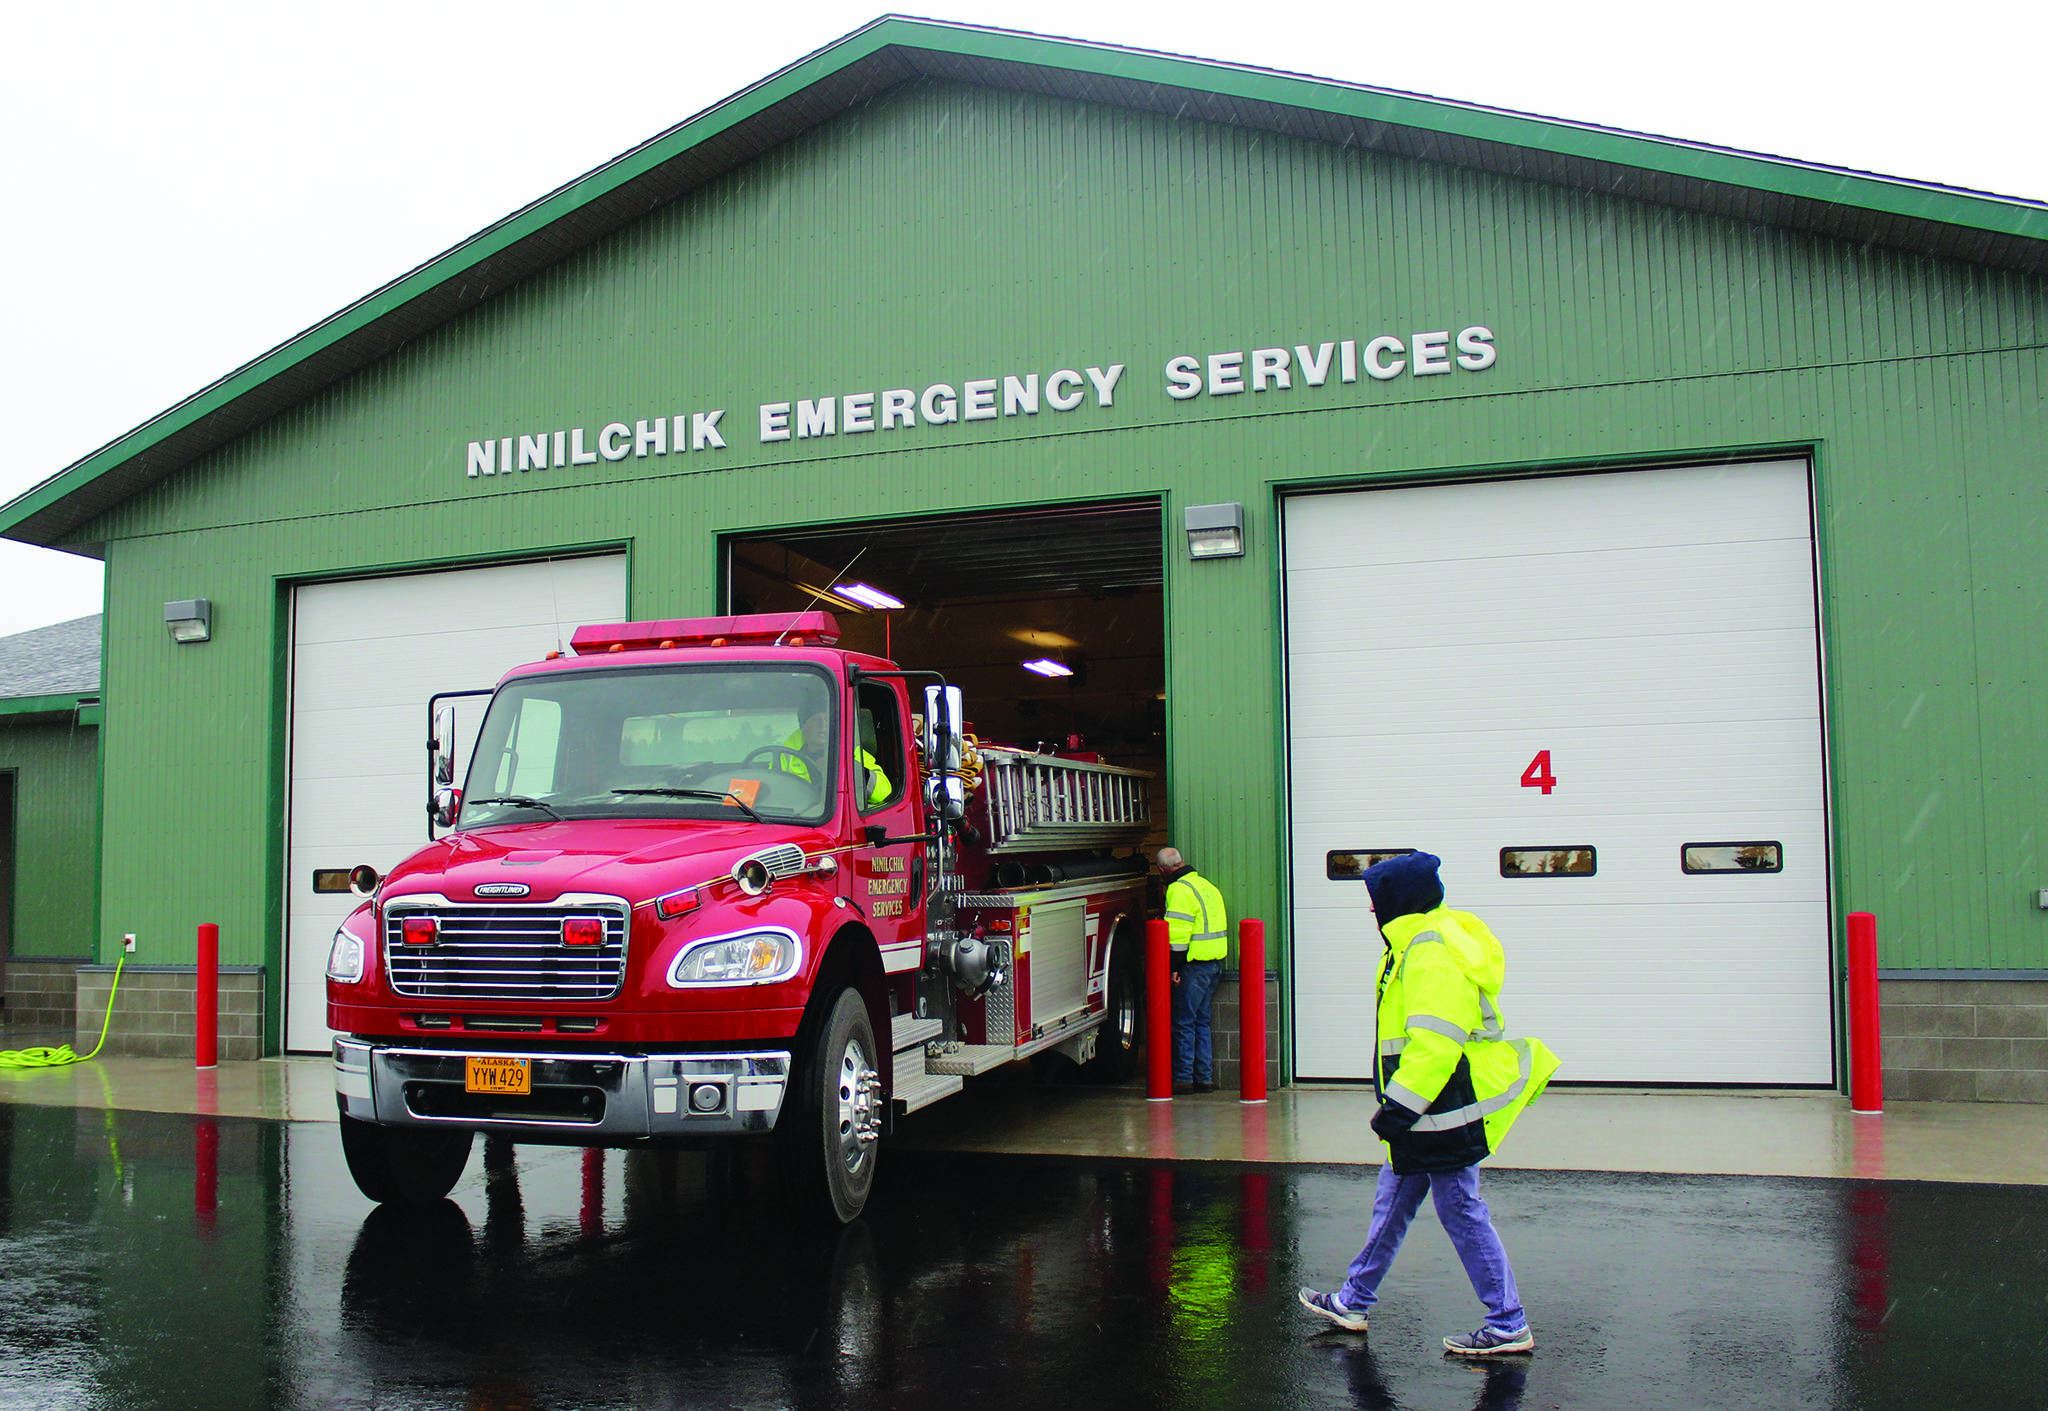 Ninilchik Fire Chief David Bear moves the fire truck out of the new Ninilchik Emergency Services building on Aug. 9, 2014, to make room for visitors to the open house of the new NES building. (Homer News file photo)